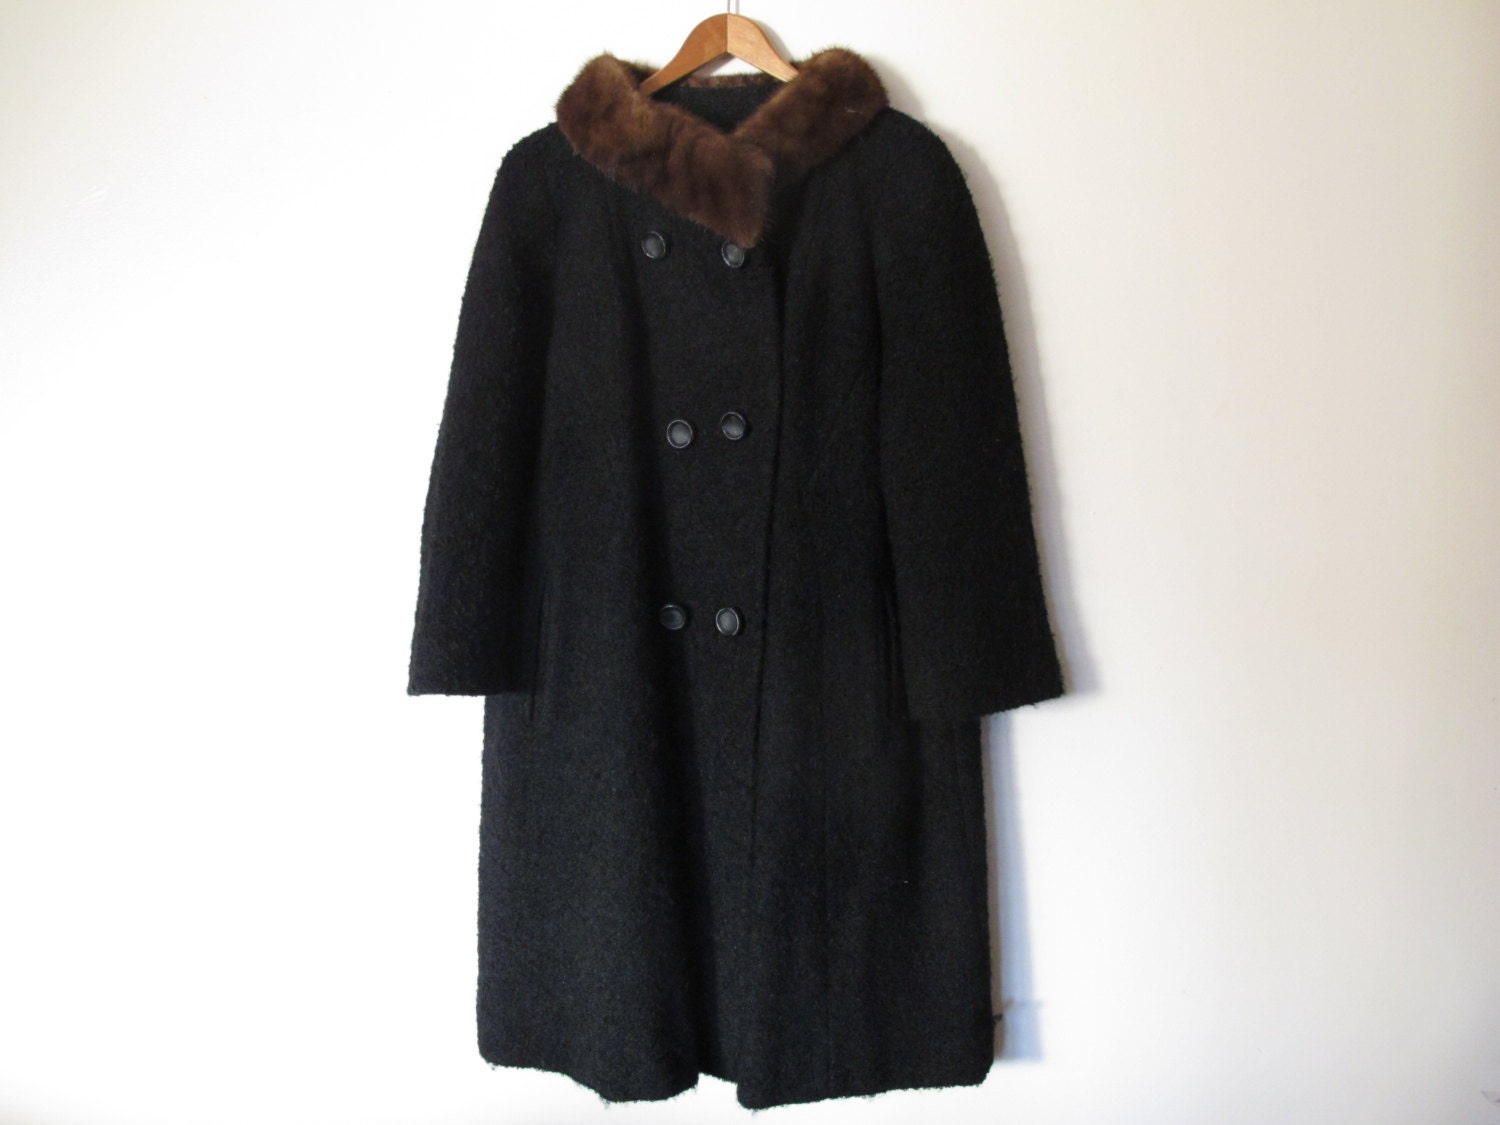 vintage coat black faux fur collar boucle long jacket double breasted S M small medium mad men - DioptersGeneralStore